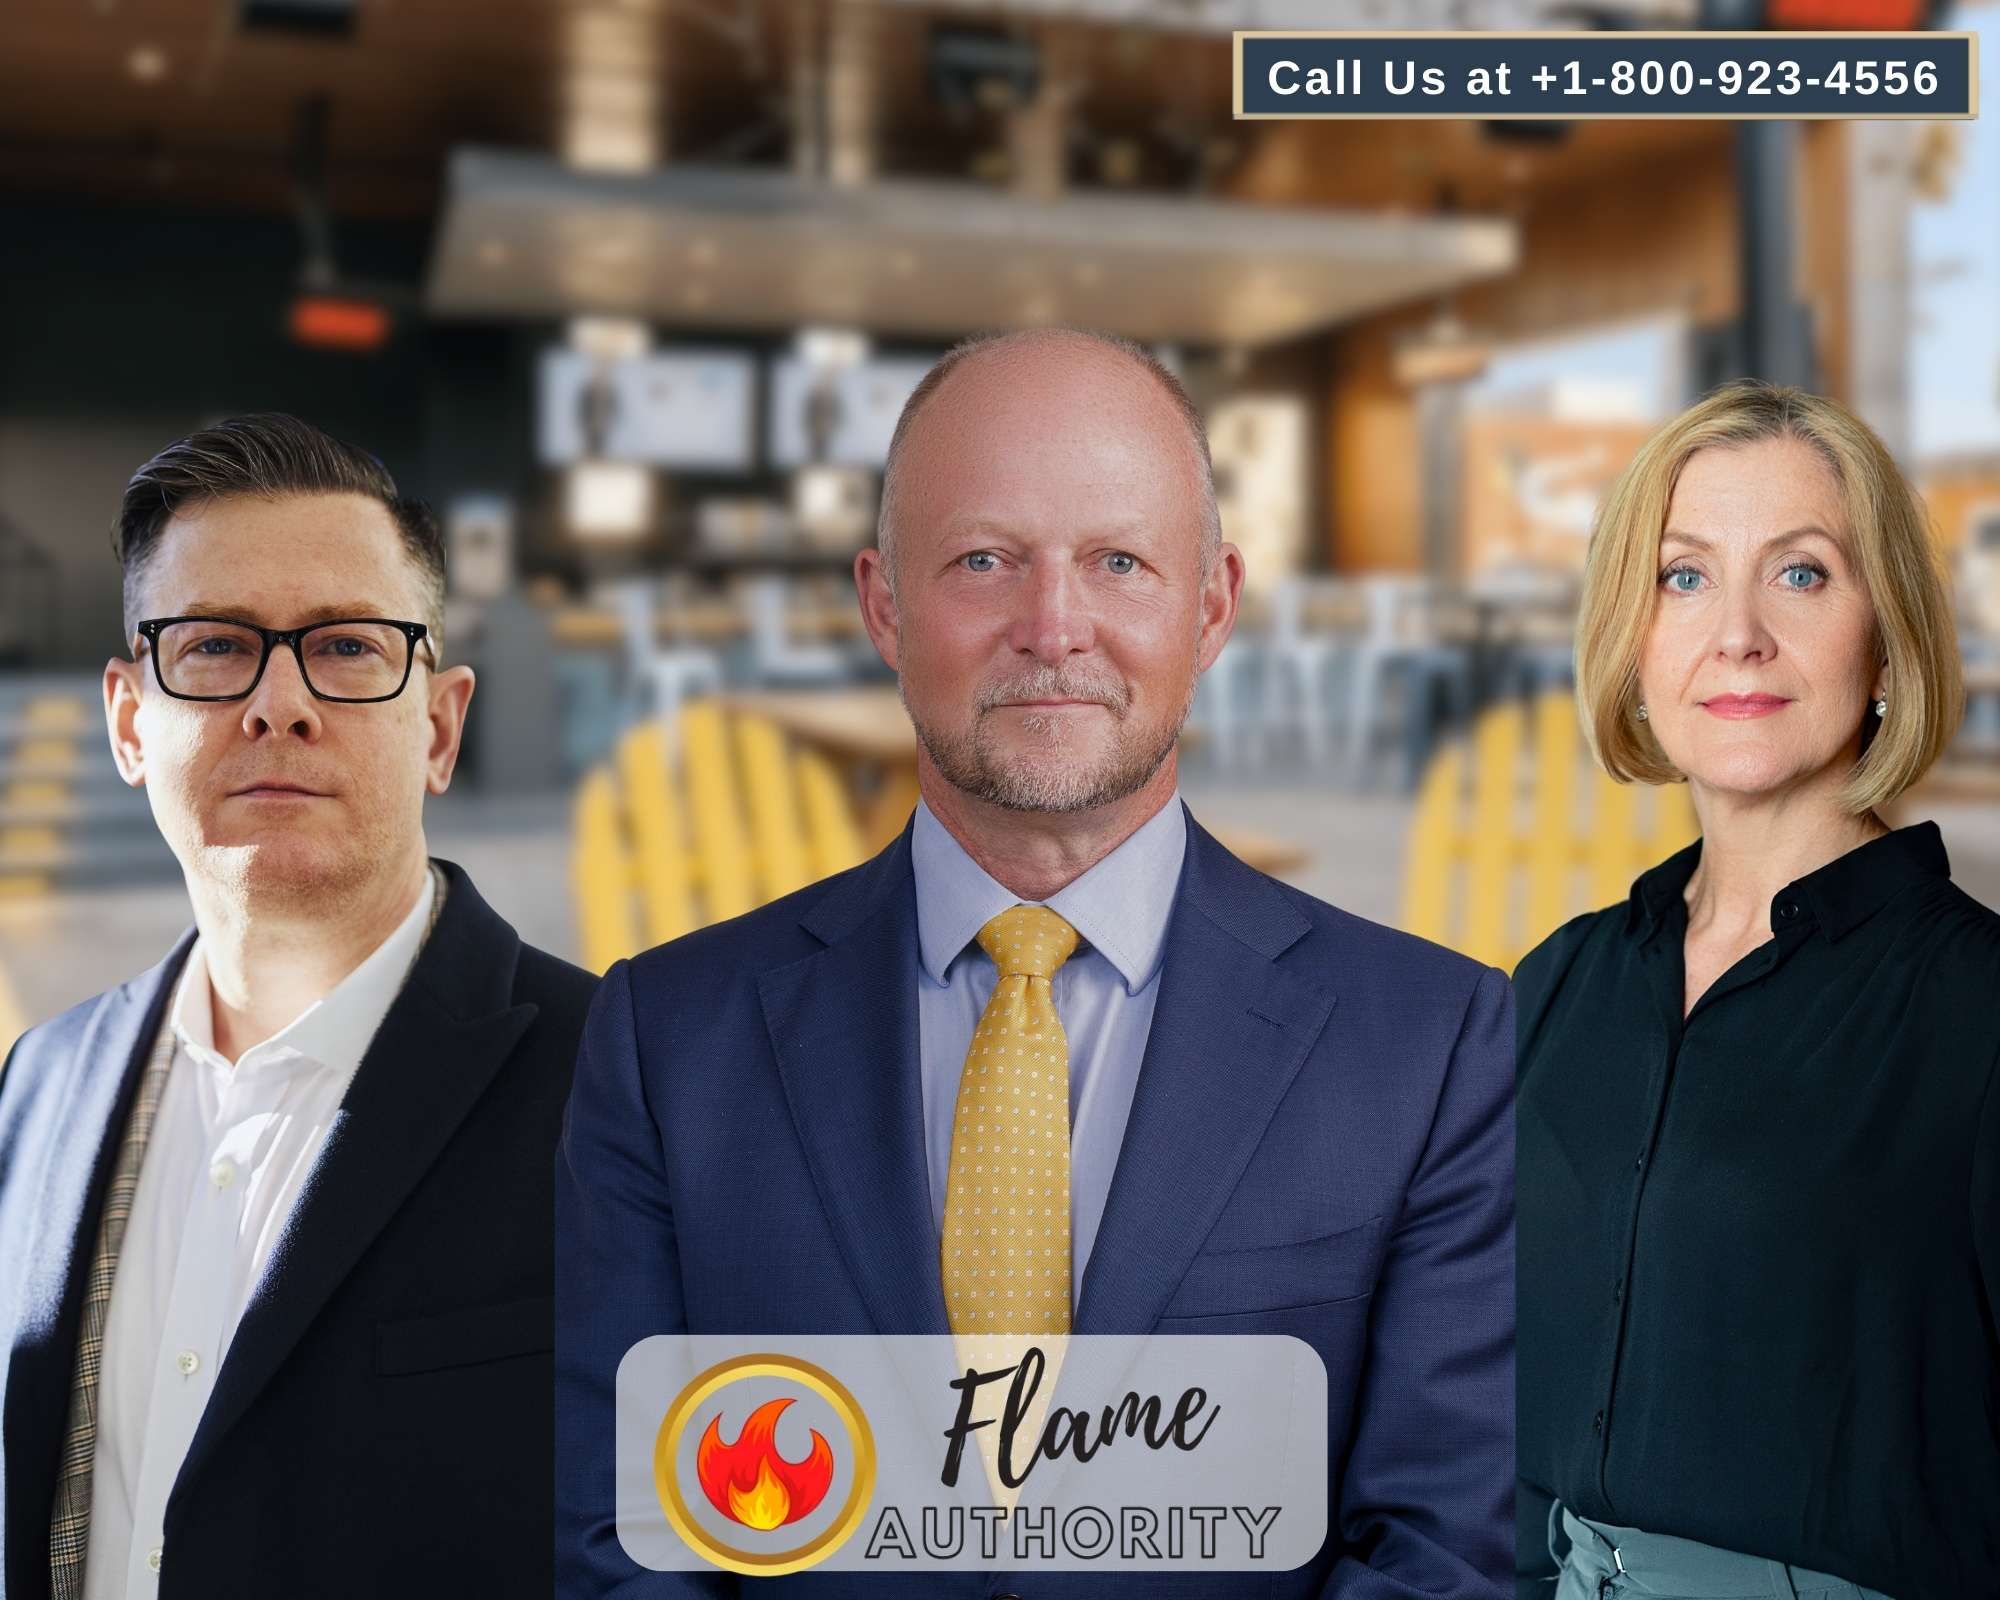 Meet the Flame Authority Experts for your outdoor fireplaces